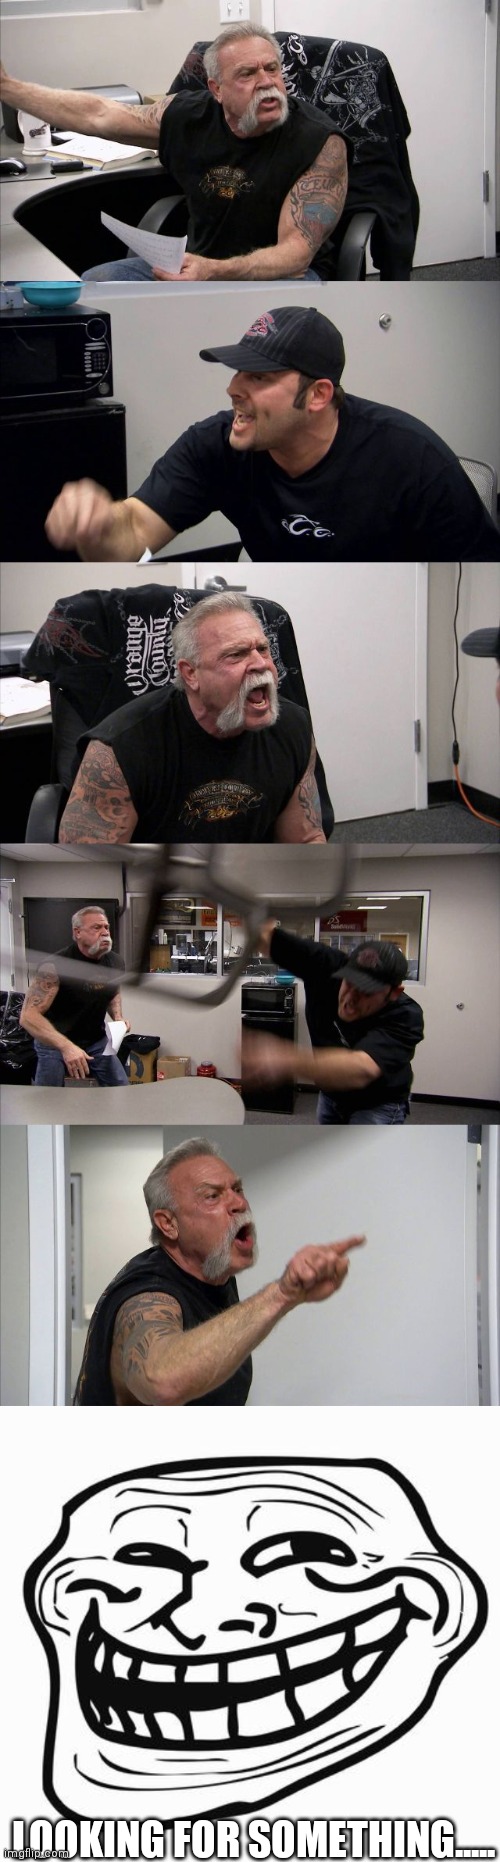 LOOKING FOR SOMETHING..... | image tagged in trollface,memes,american chopper argument | made w/ Imgflip meme maker